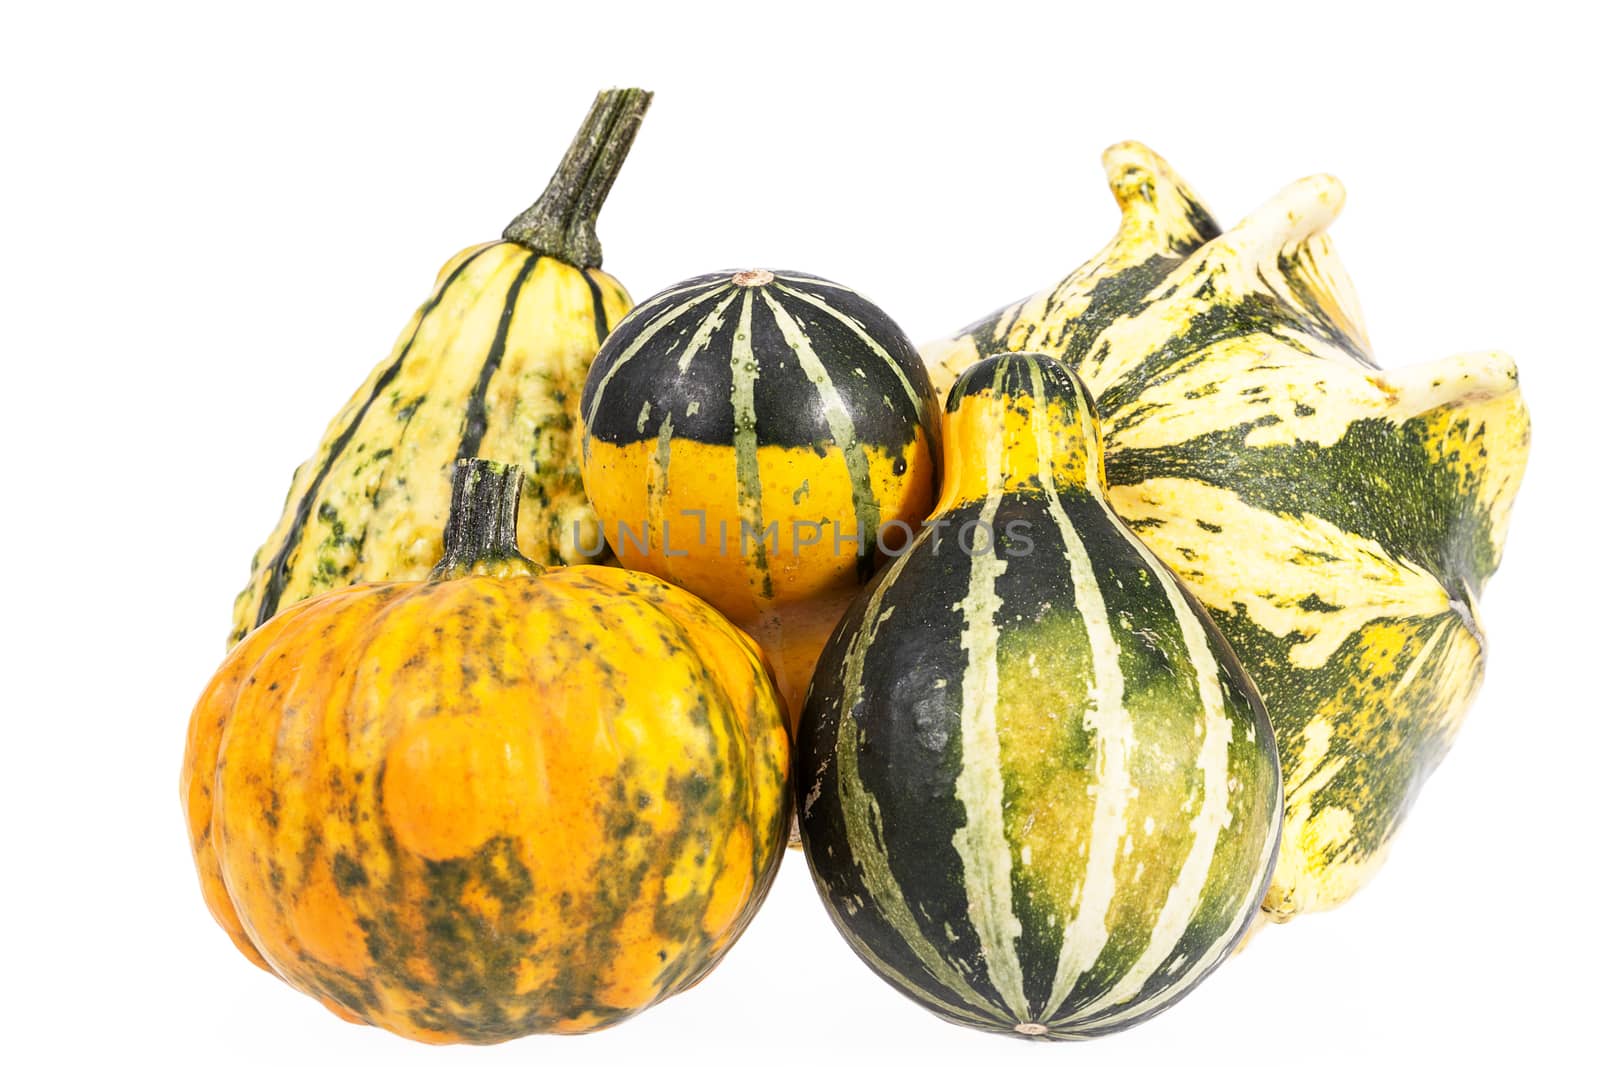 Vegetables of pumpkin decorative isolated on white background